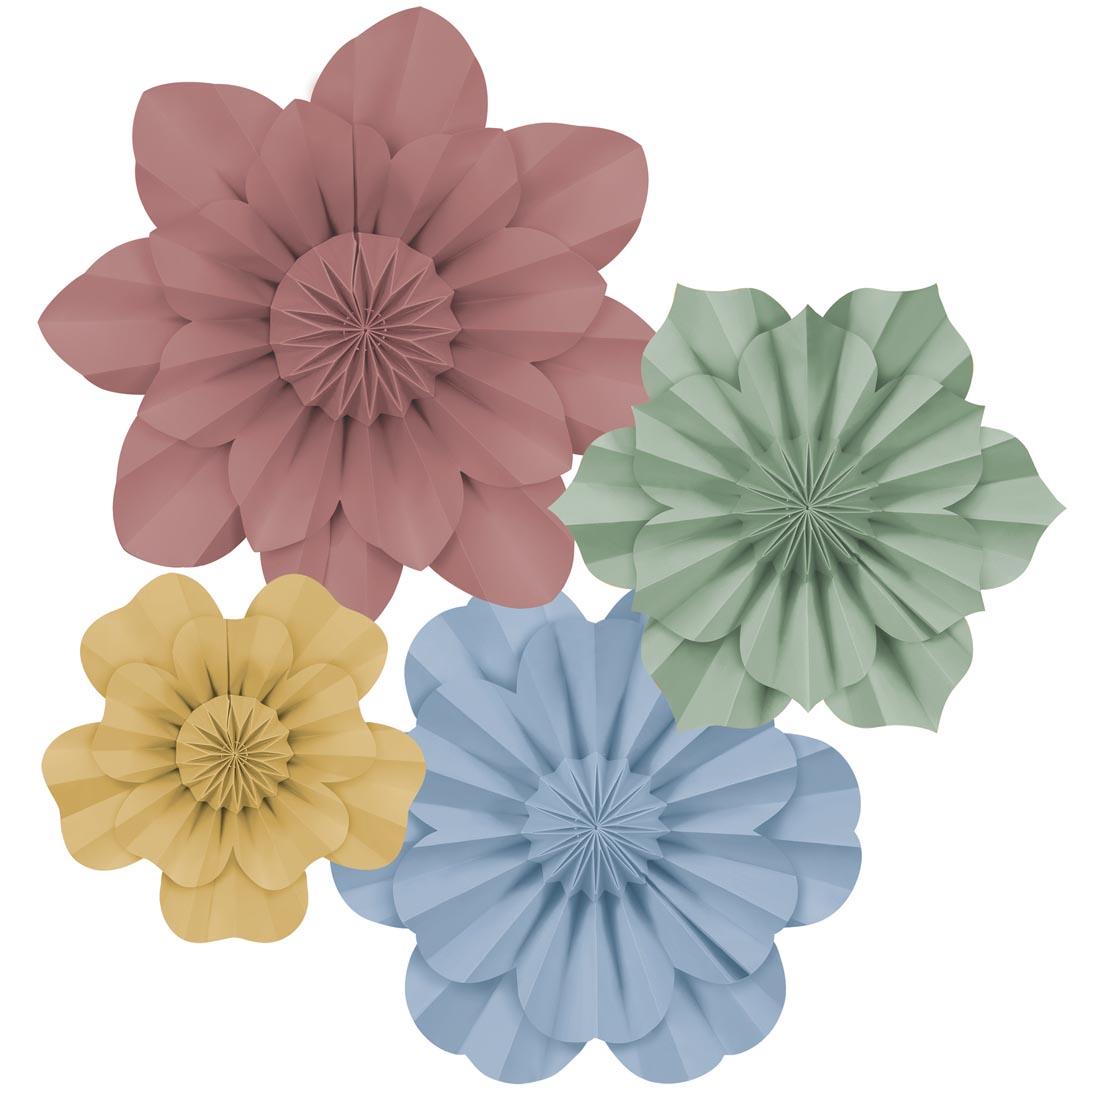 Cottage Charm Paper Flowers from the Classroom Cottage collection by Teacher Created Resources